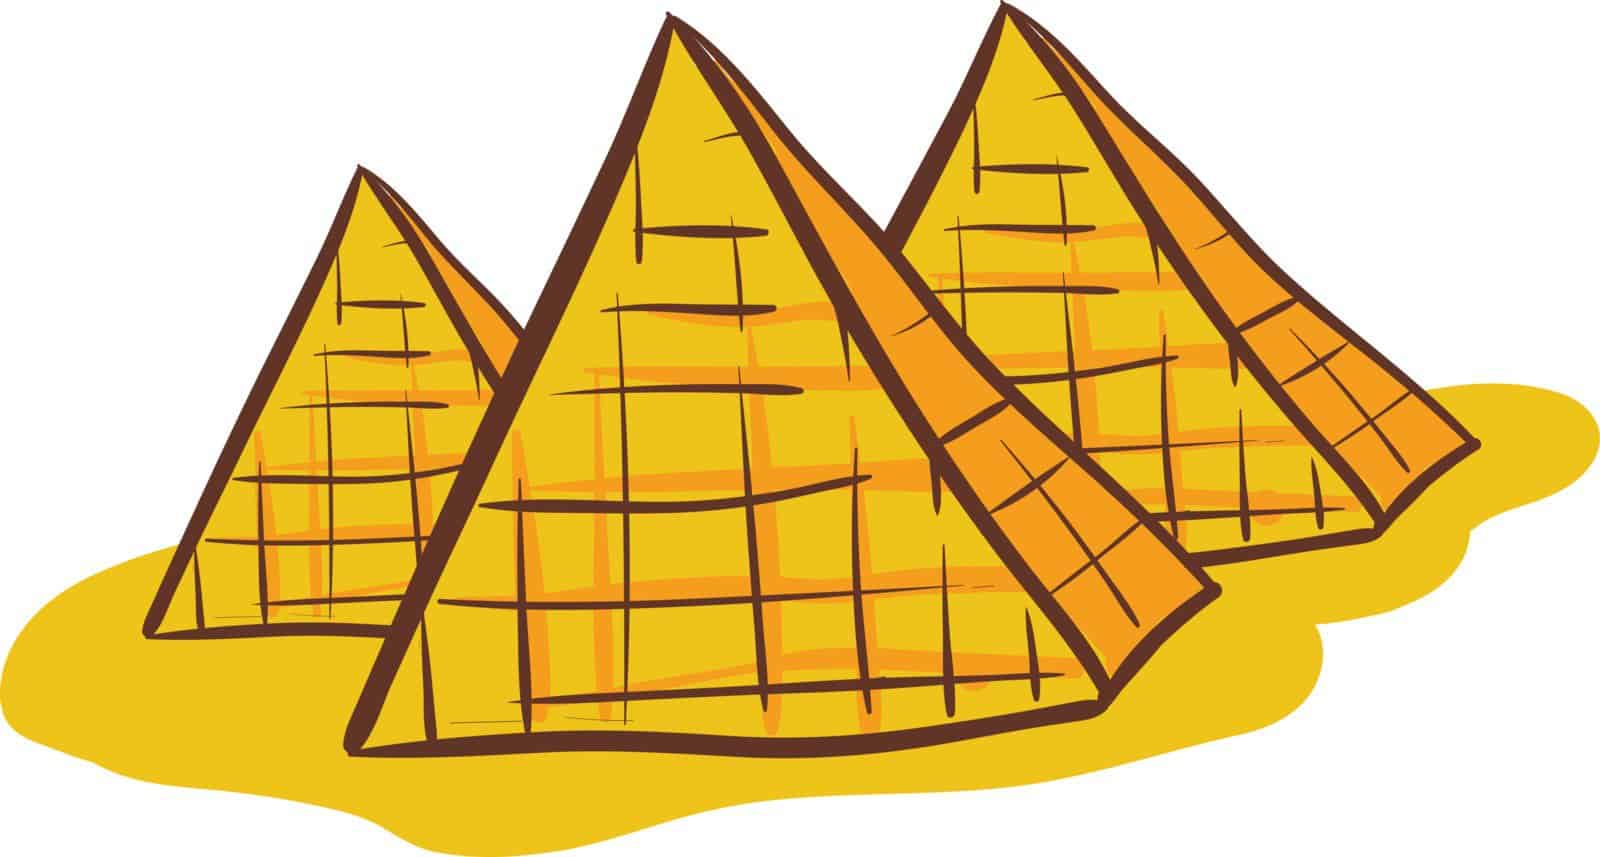 What is Testing Pyramid? – Famous Pharaoh’s Guide